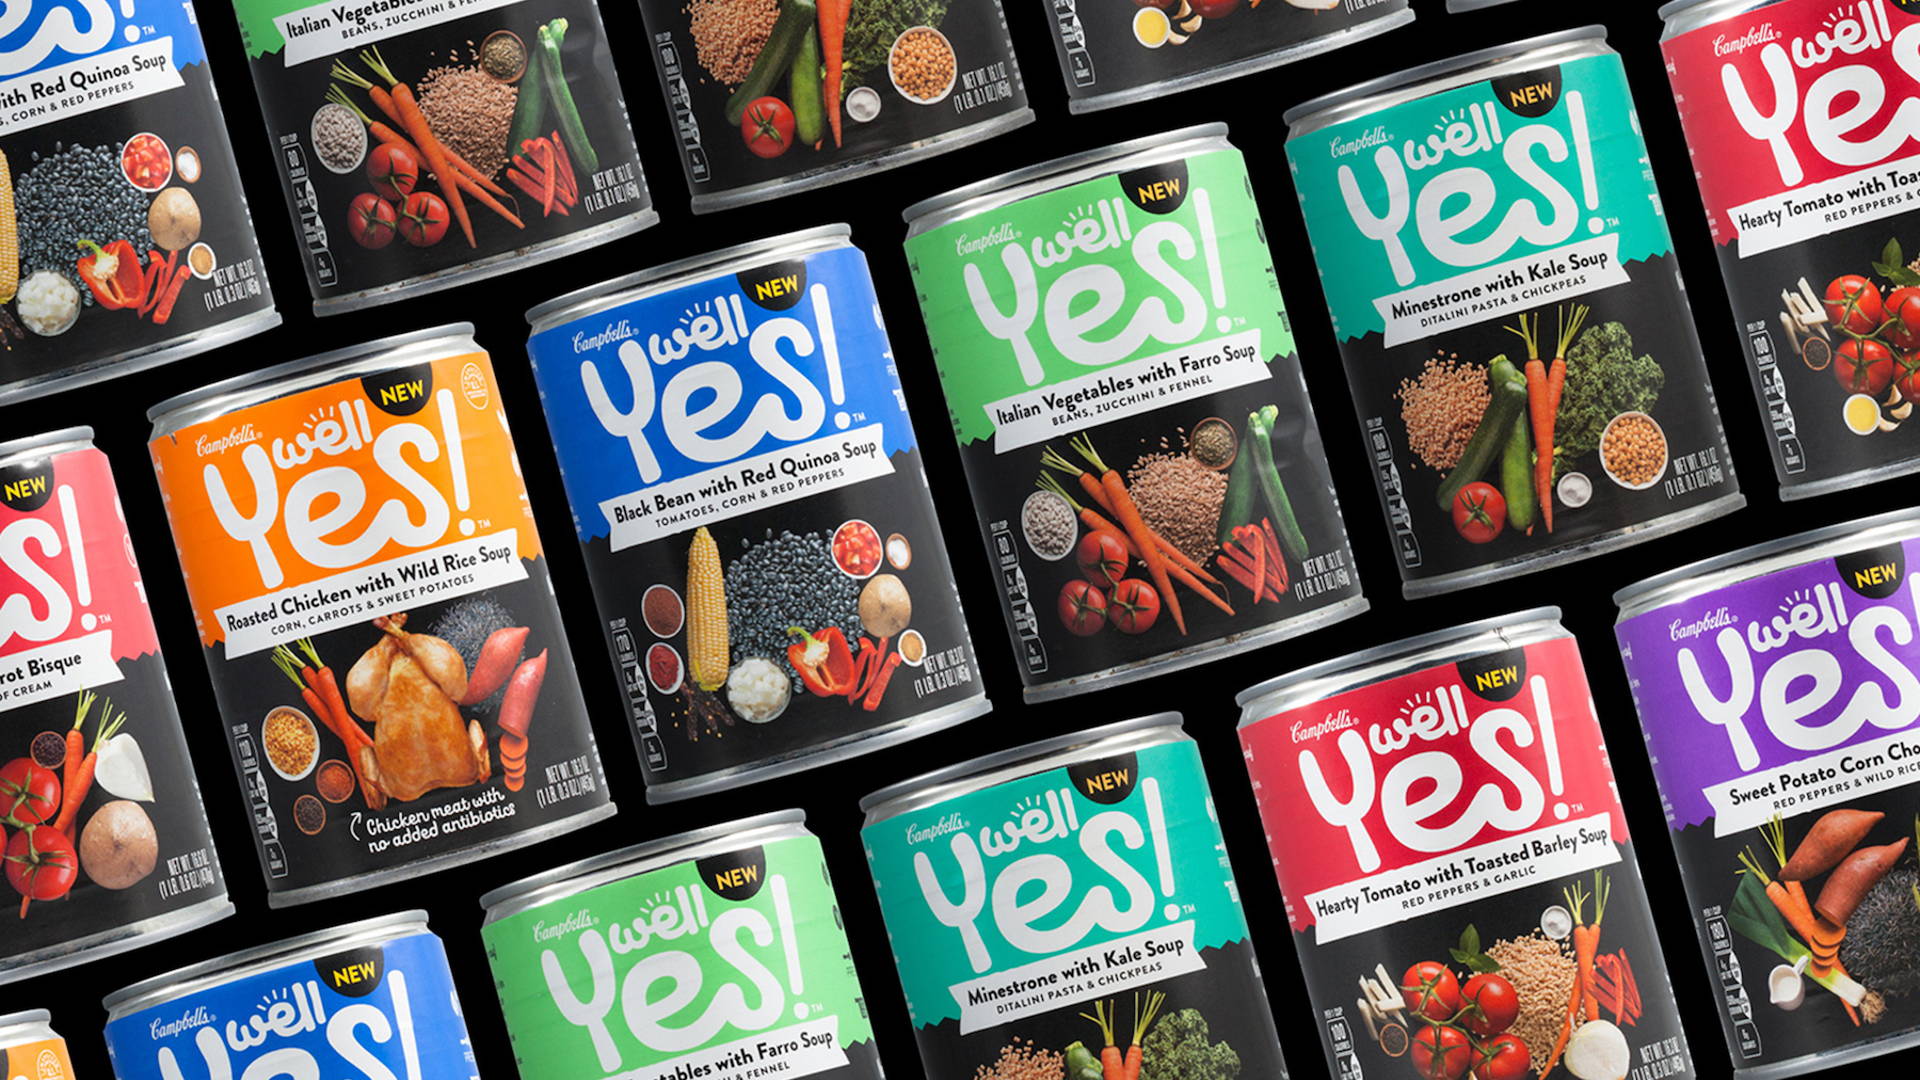 Featured image for Get Your Wellness on with Campbell’s Well Yes! Soups